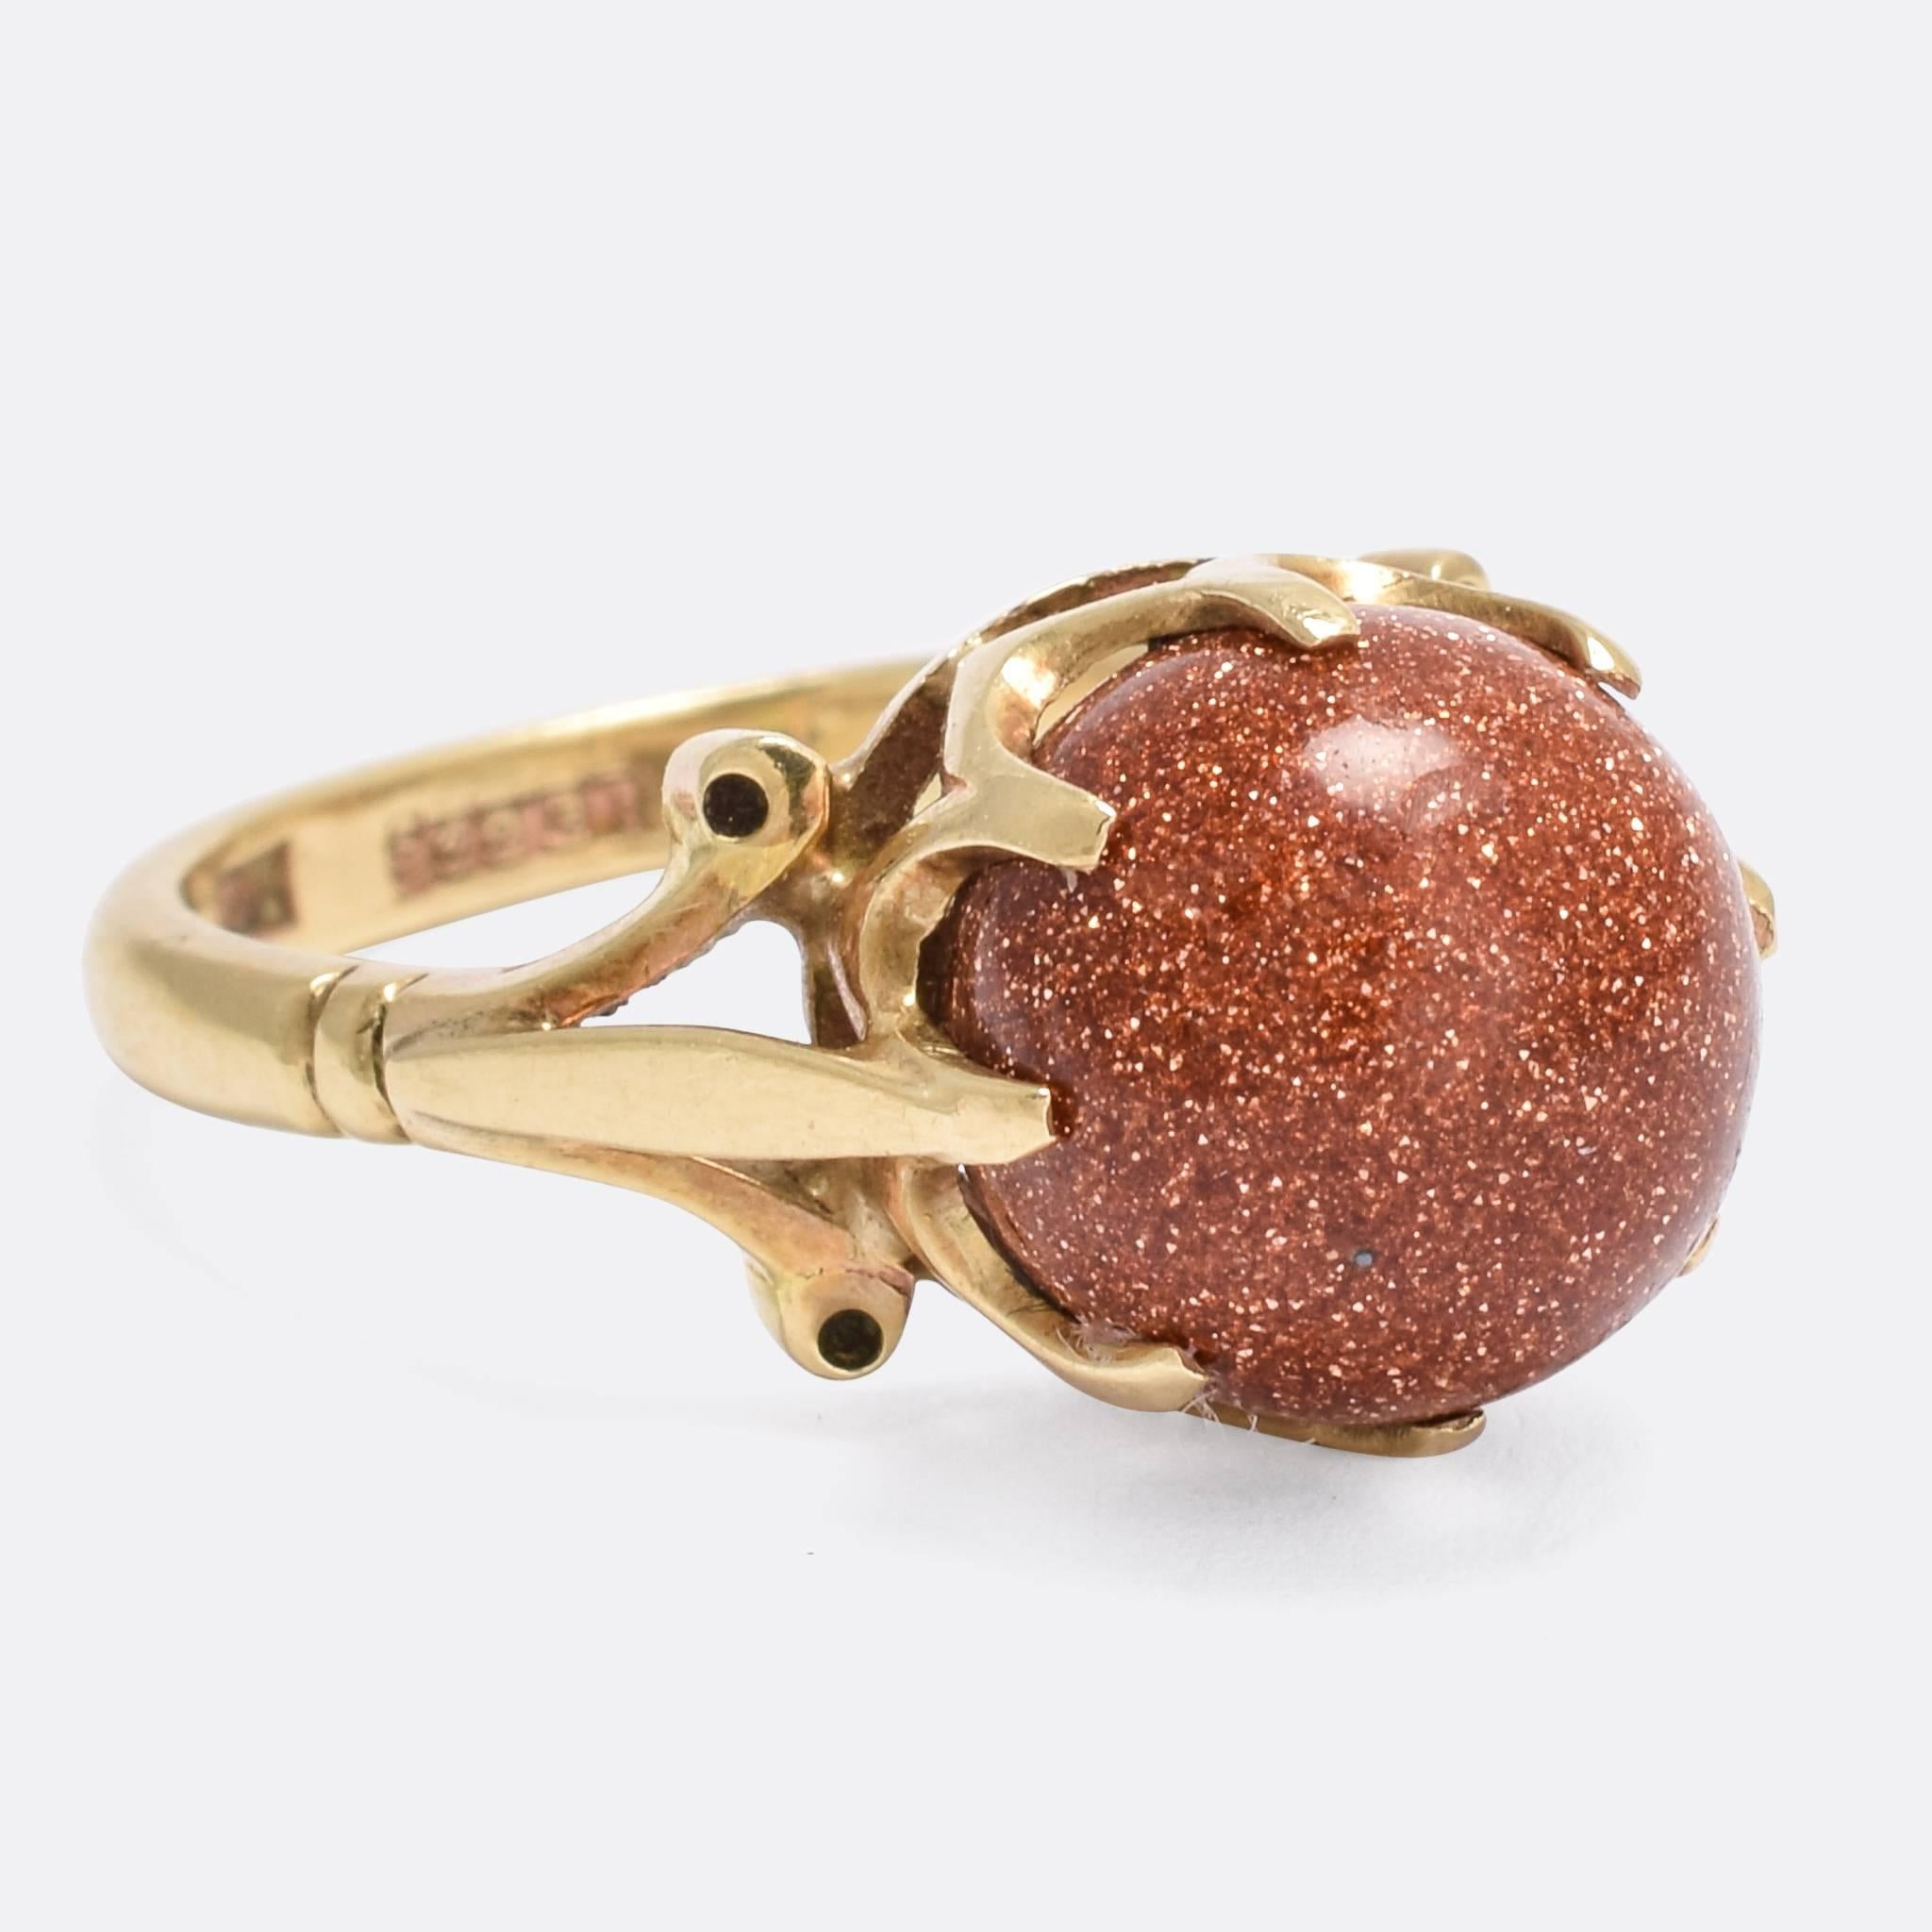 An unusual antique ring, set with a goldstone orb in exaggerated claw settings. It's finished with typically Edwardian flourishes, modelled in 9k yellow gold throughout. 

Goldstone, also known as aventurine glass or monkstone, is a kind of